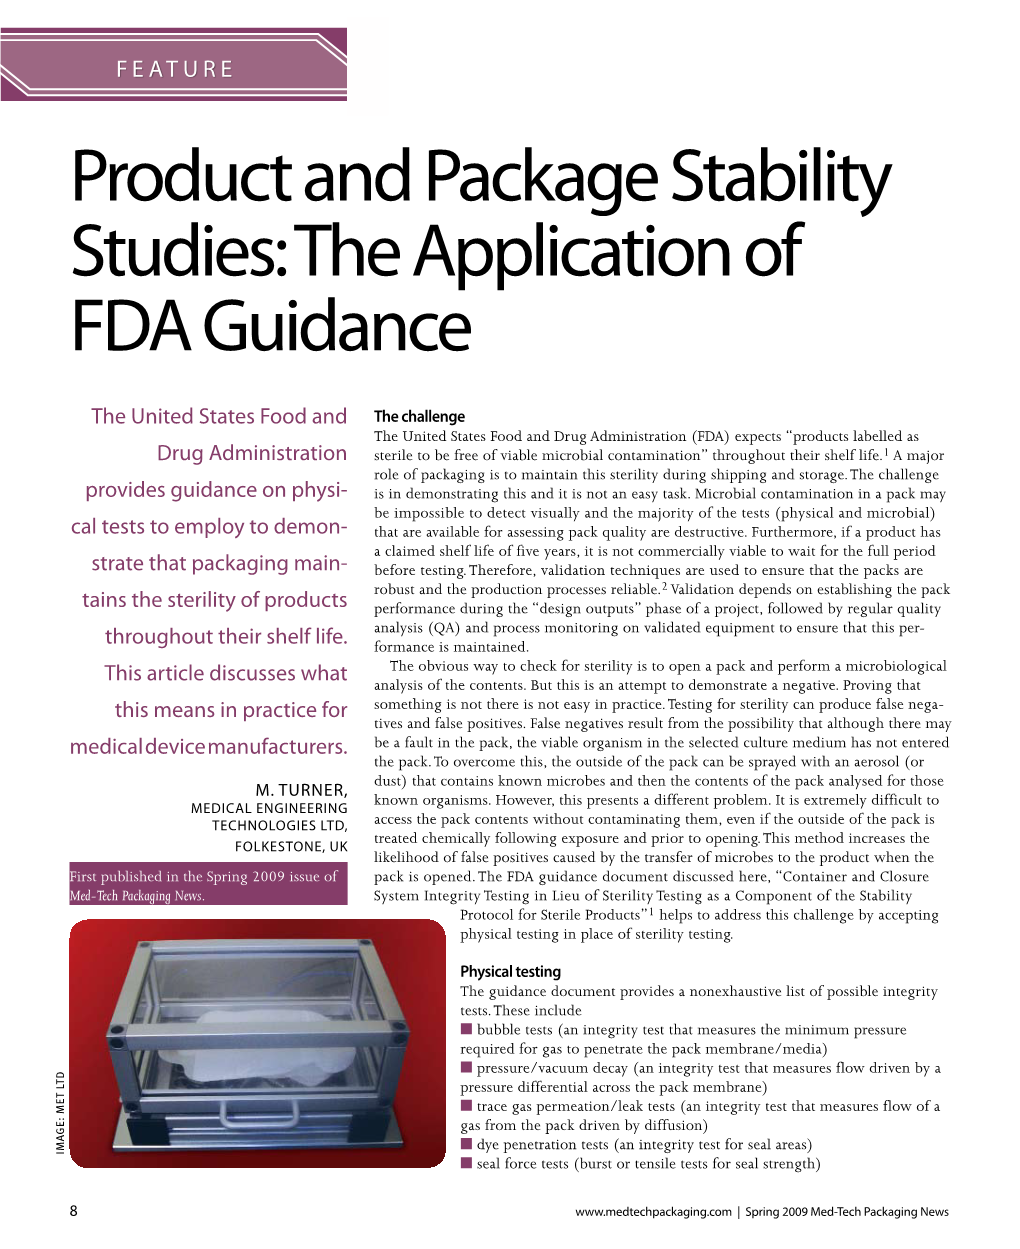 Product and Package Stability Studies: the Application of FDA Guidance